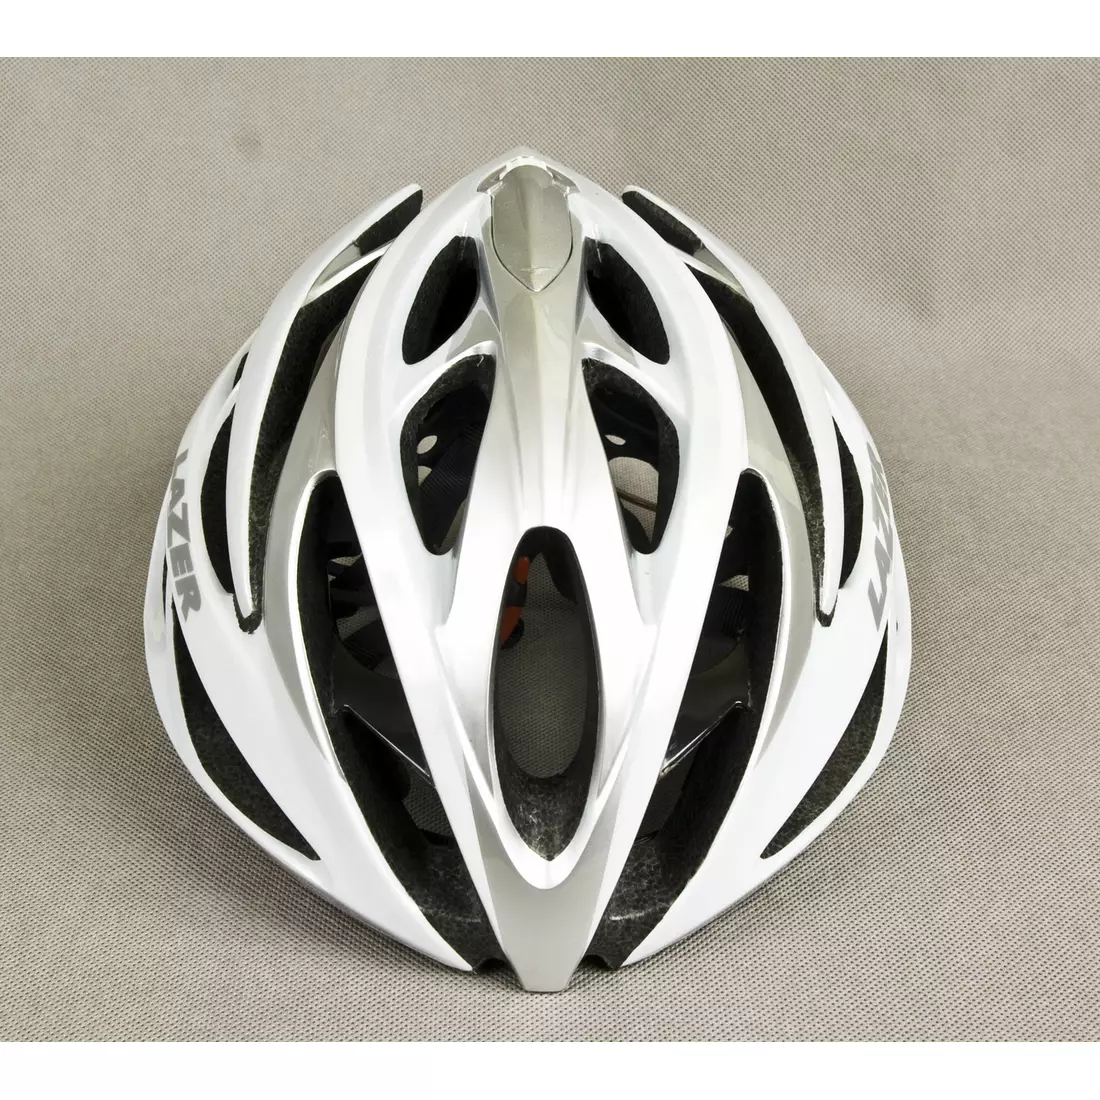 LAZER O2 road bicycle helmet, white and silver